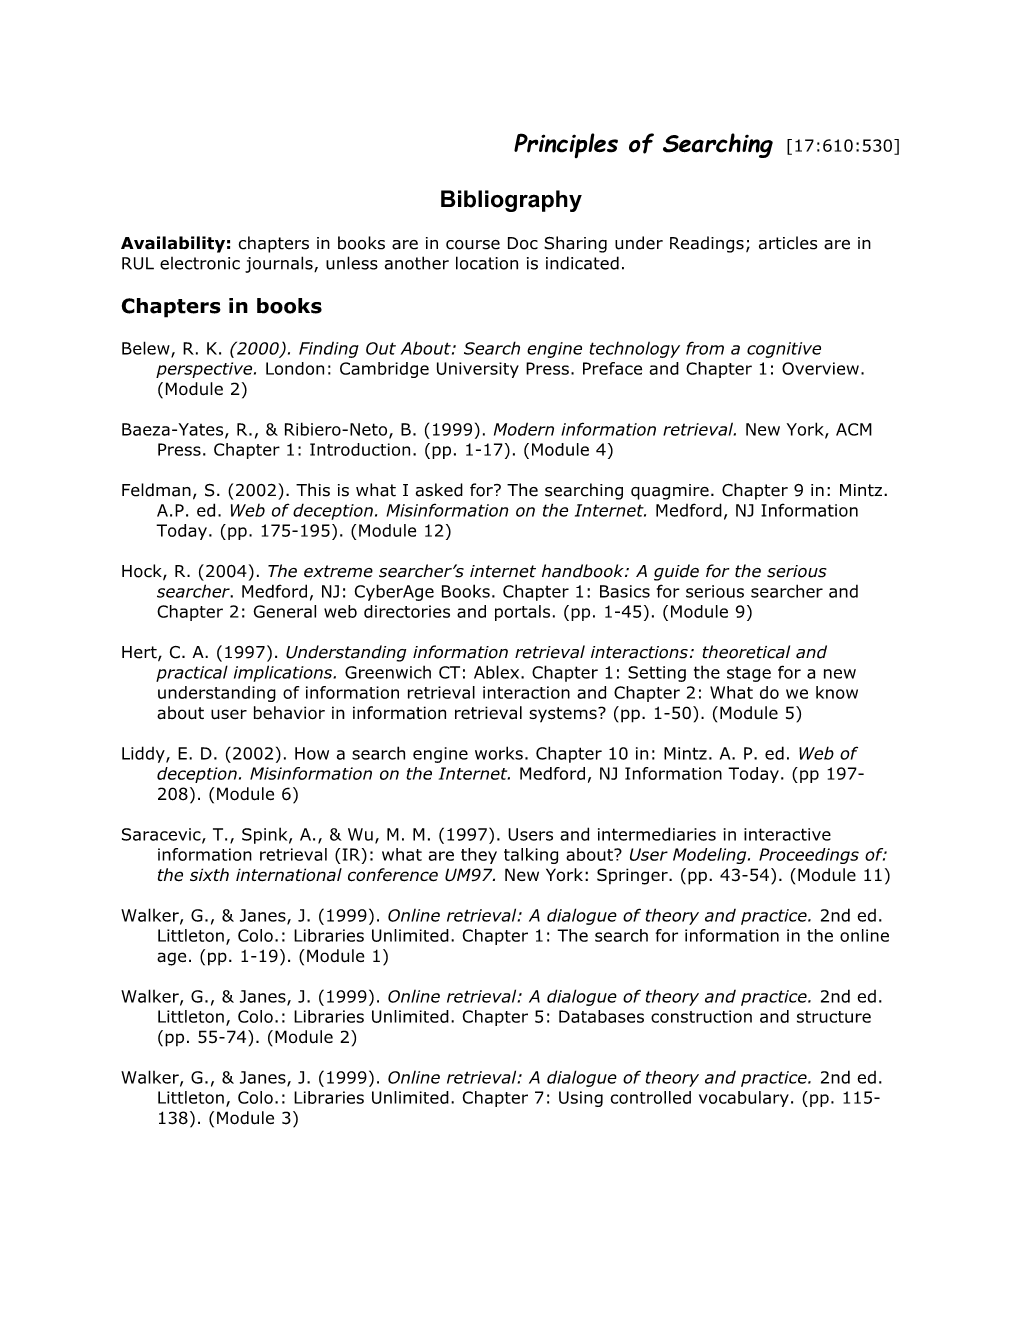 Principles of Searching - Bibliography 1